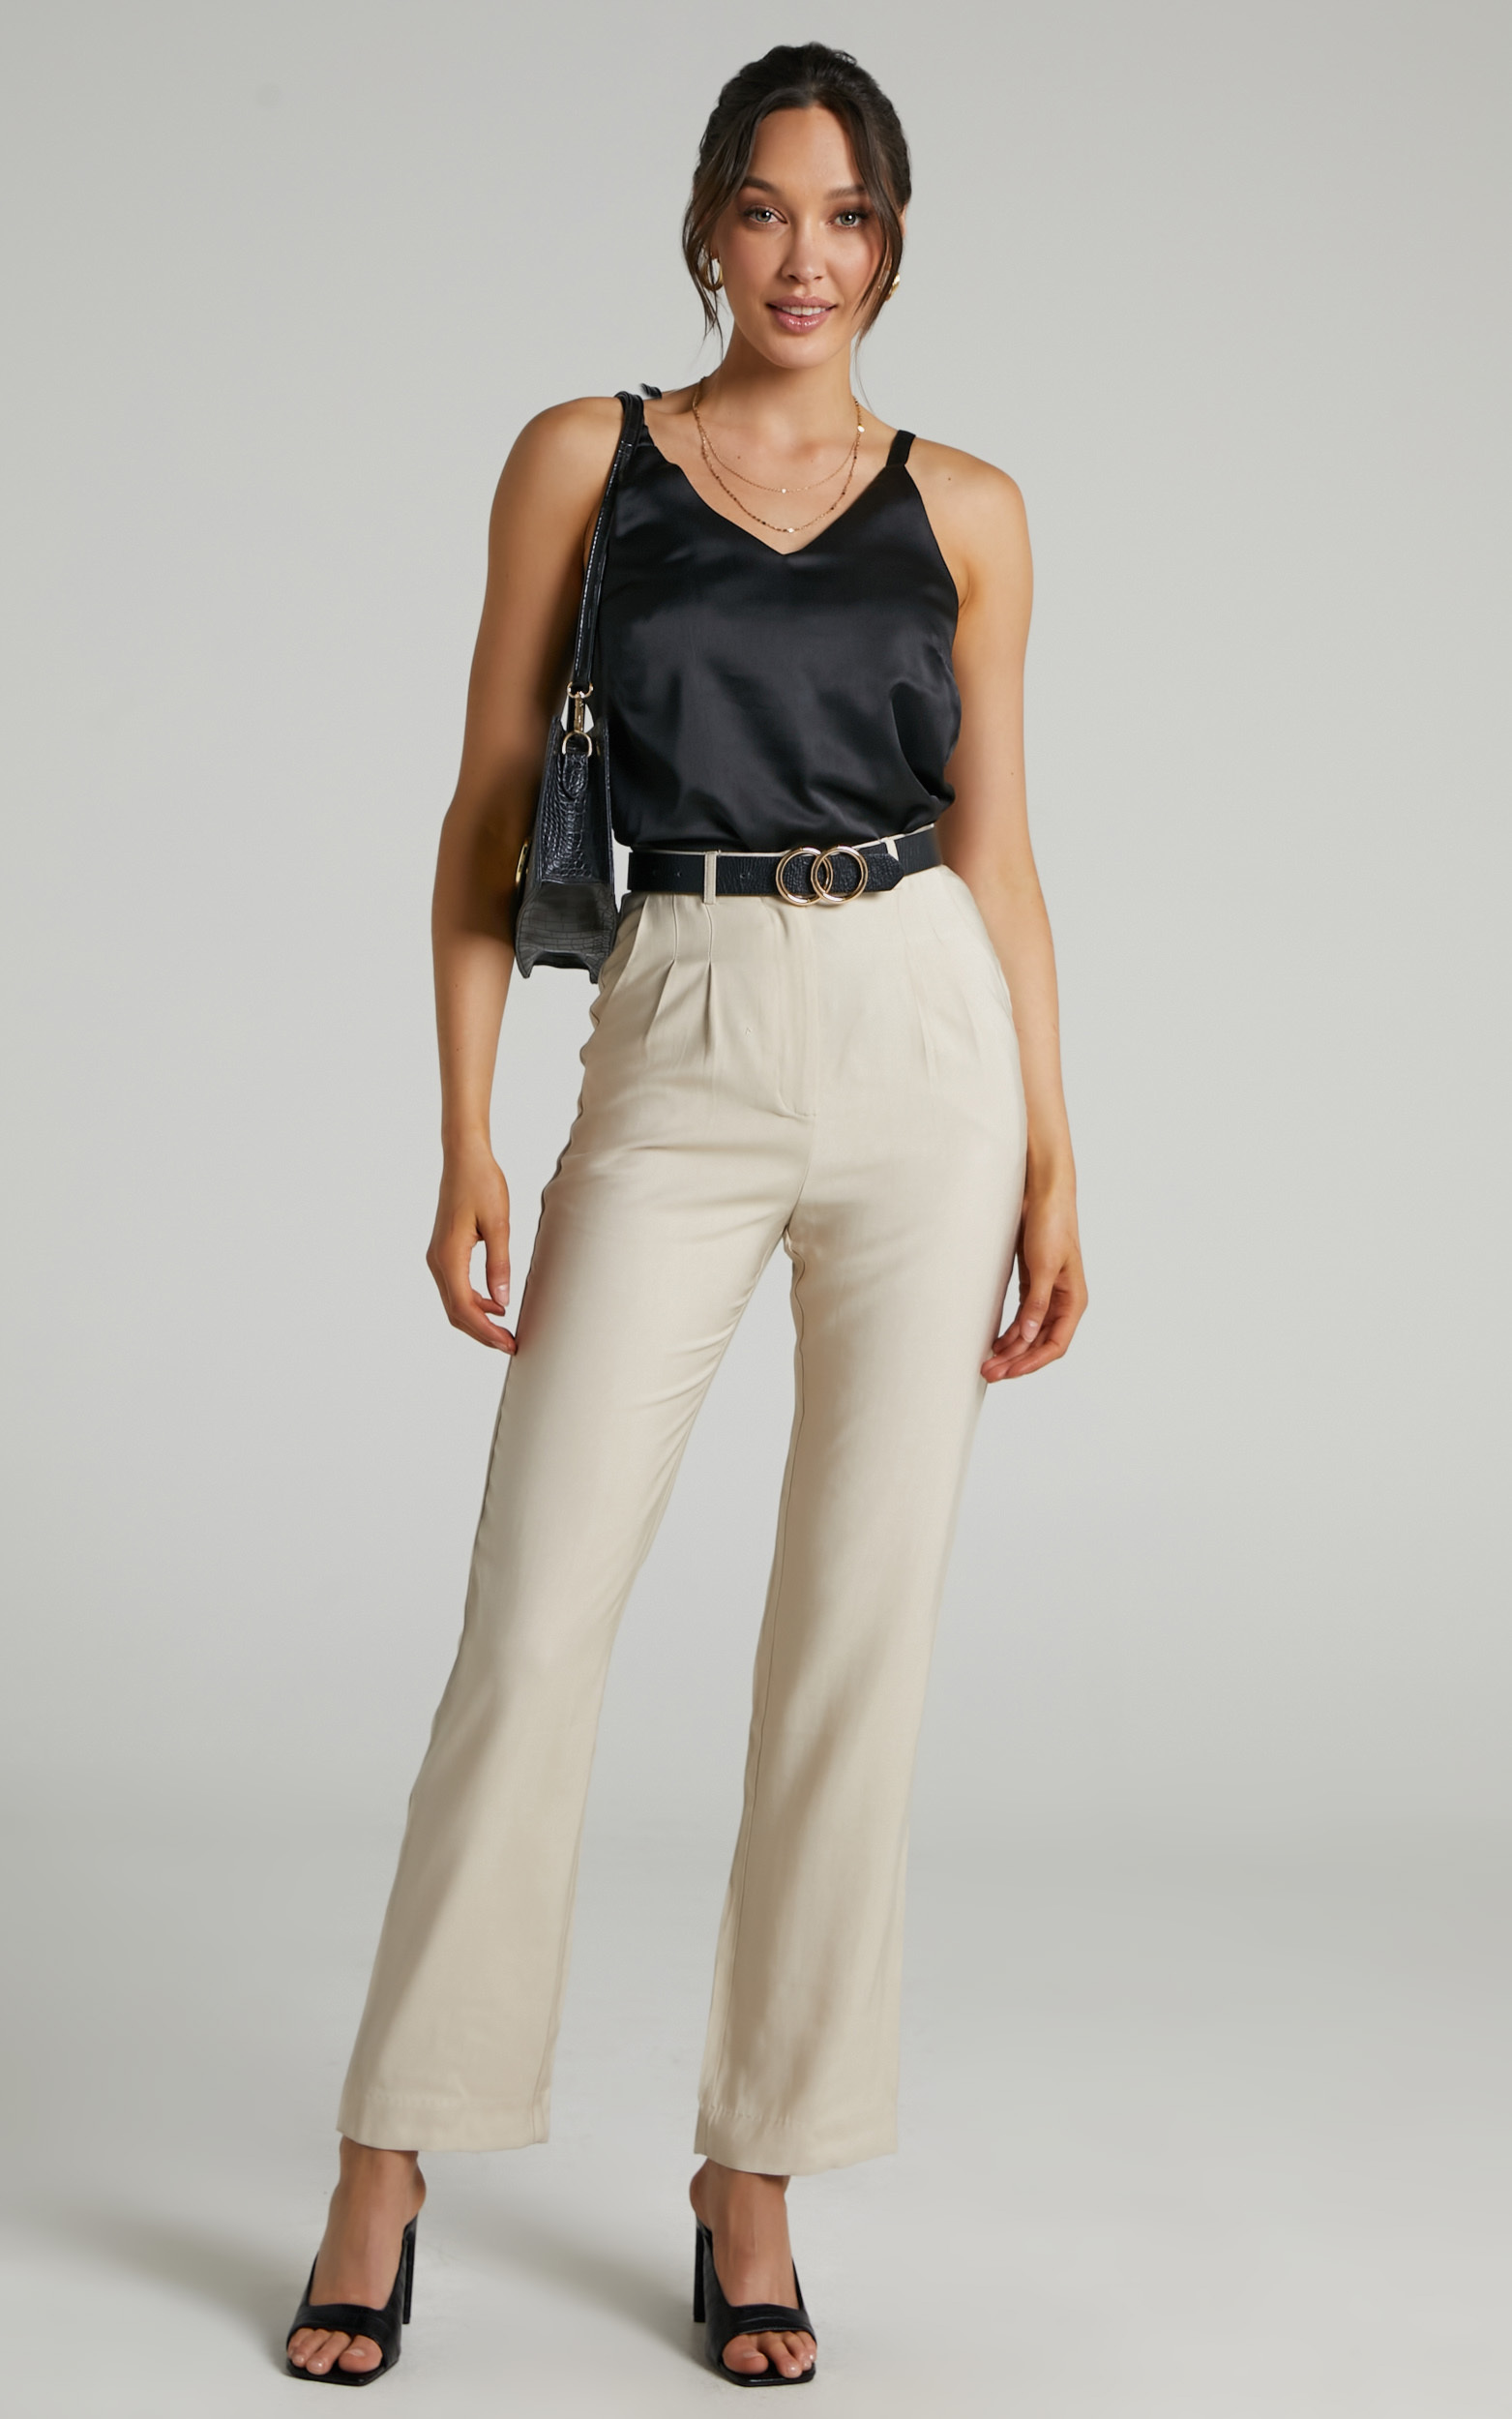 Kinara Full LengthTailored Pant in Beige - 06, CRE1, hi-res image number null